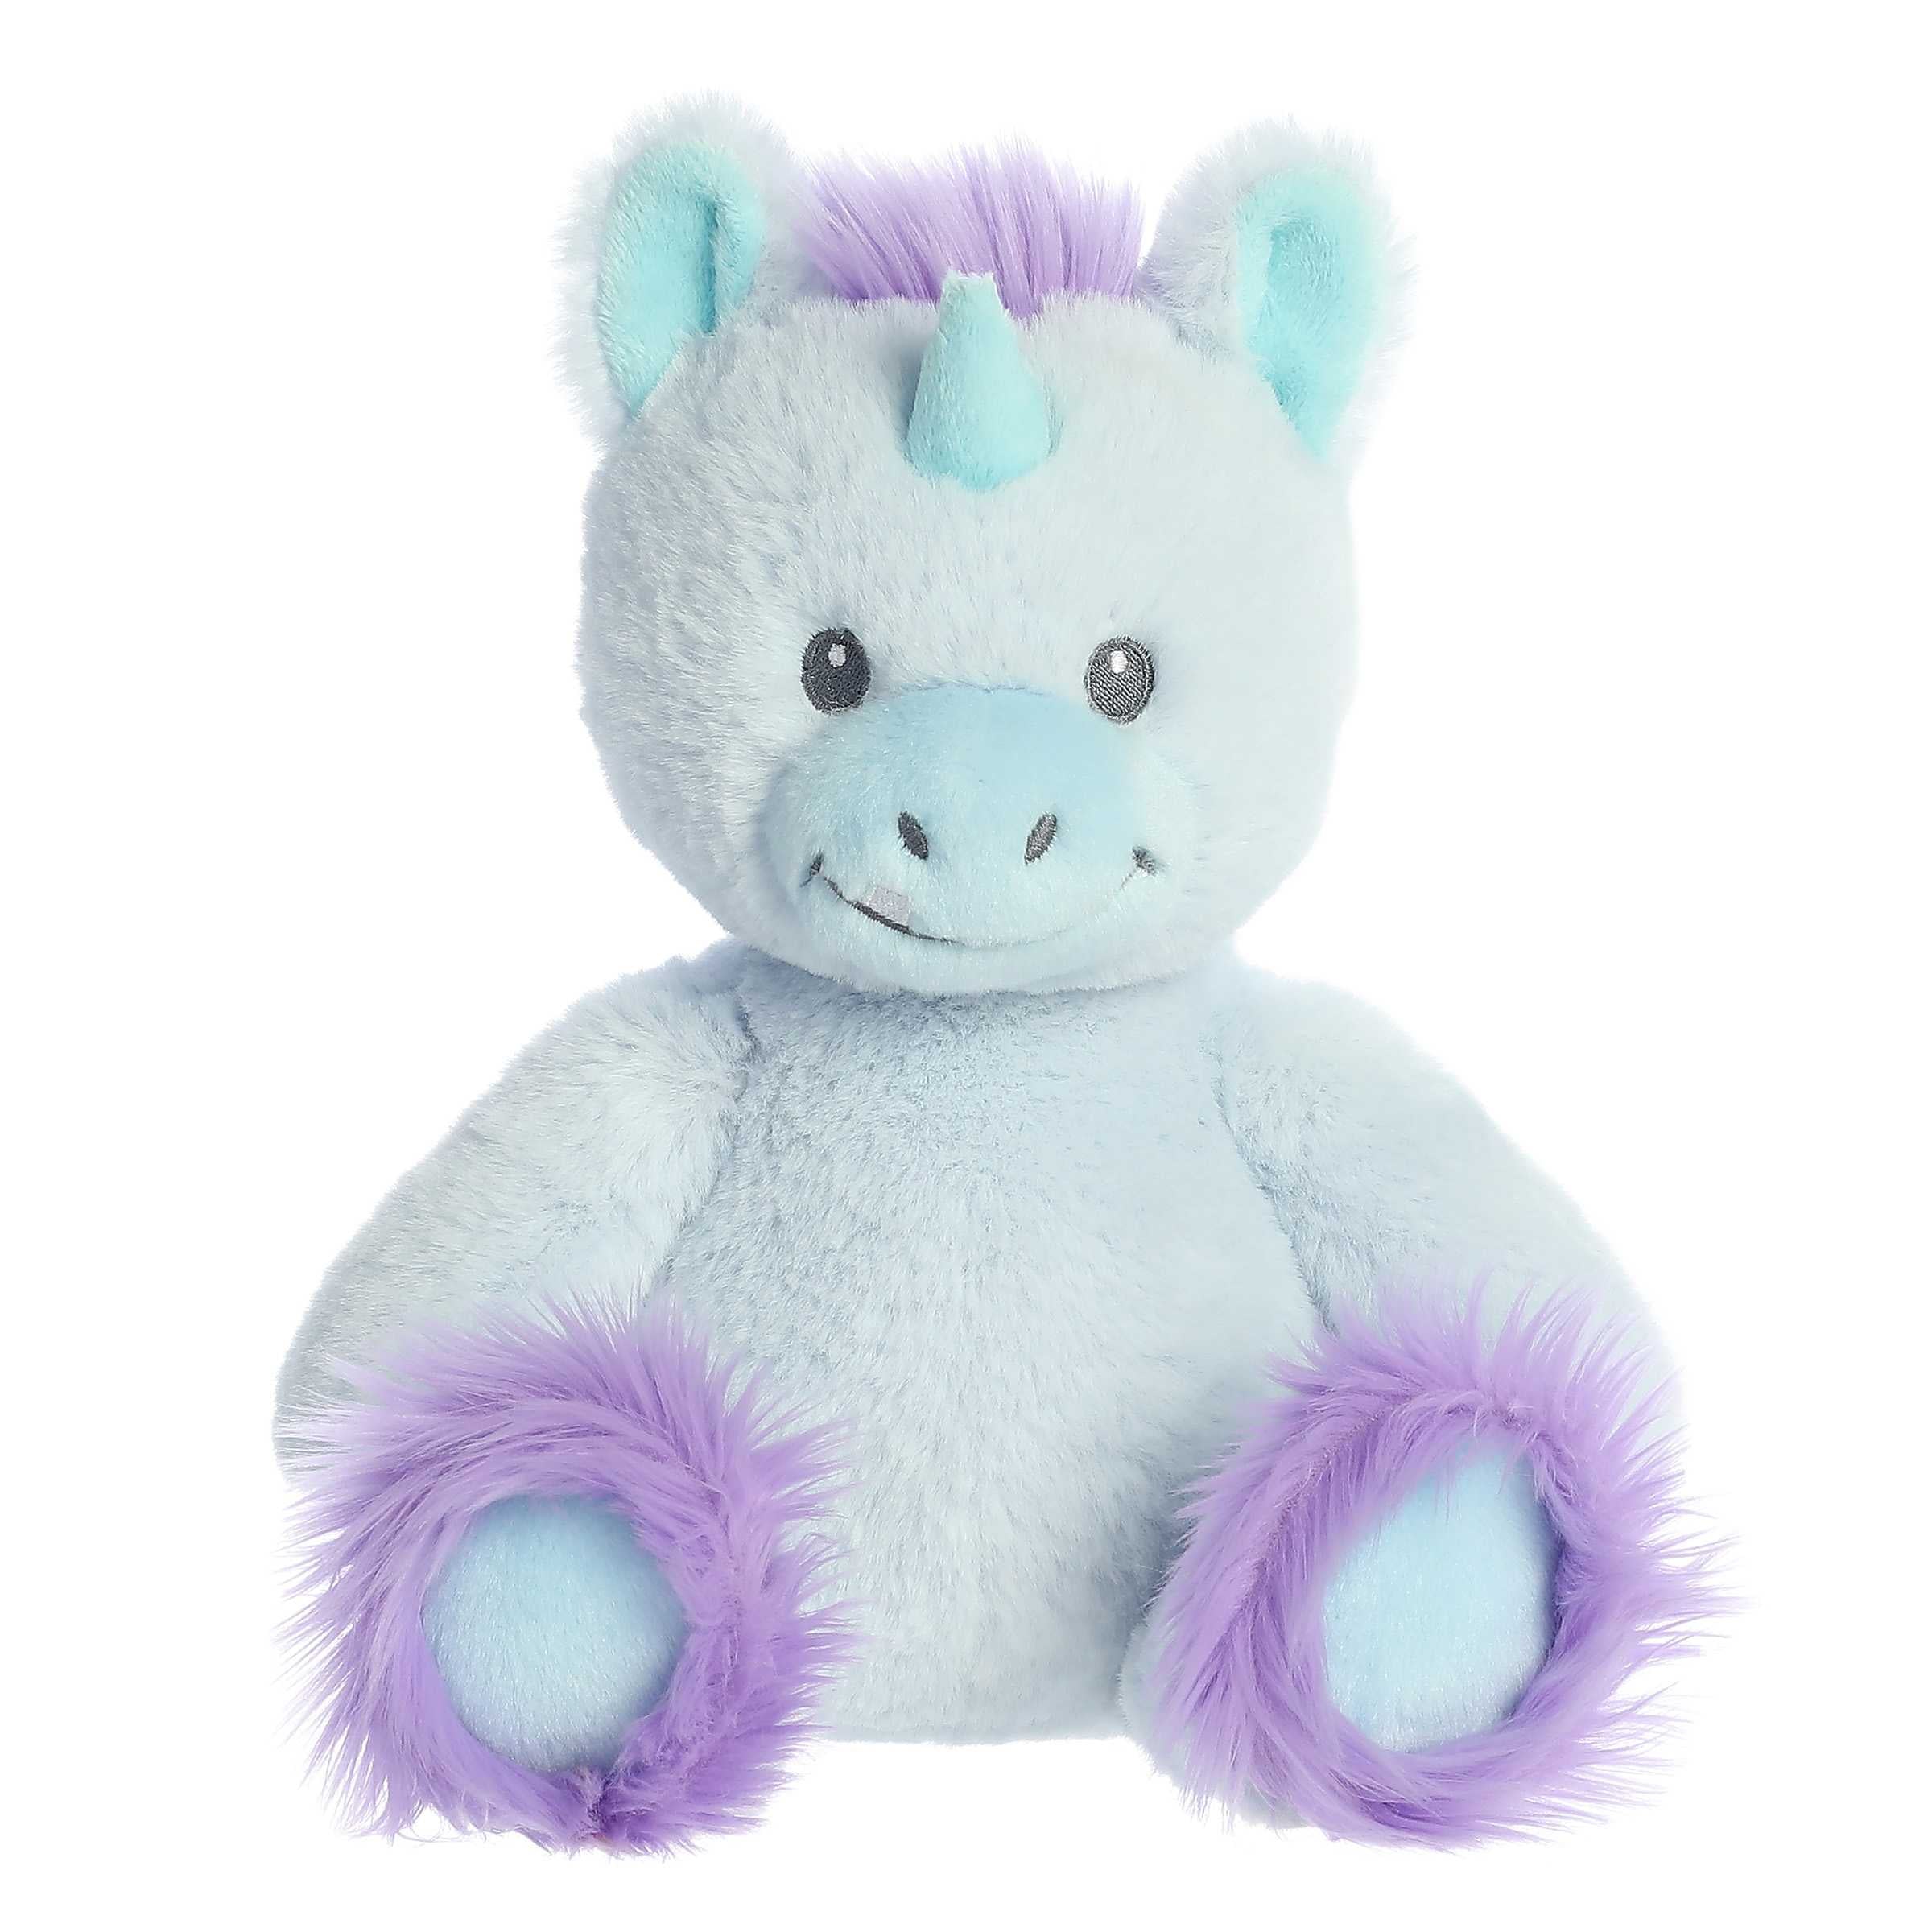 Adorable blue Unicorn plush toy with a smiling face, purple fur on feet and head, and a blue horn in a sitting position.